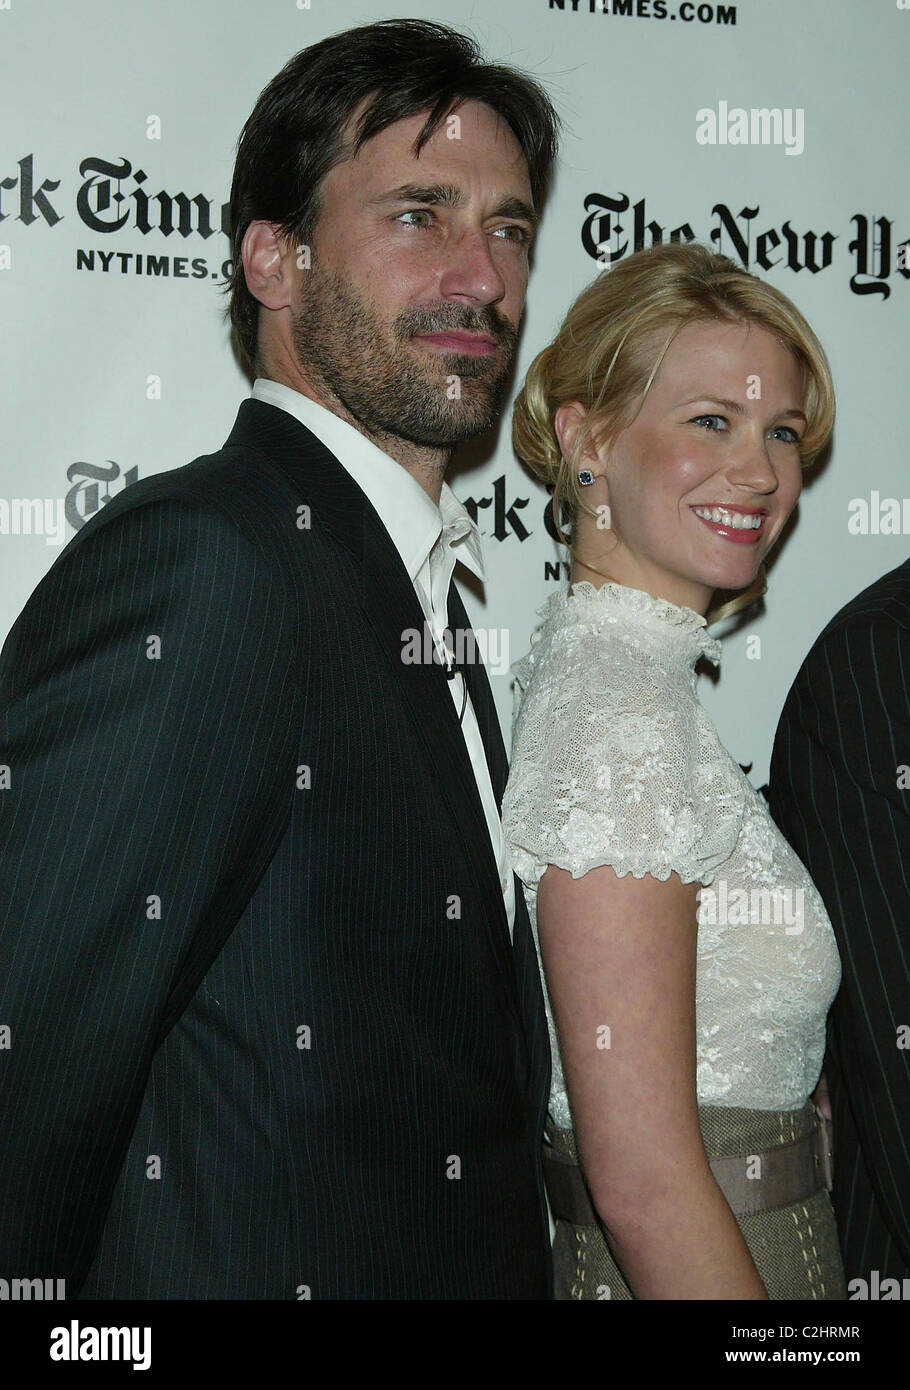 Jon Hamm & January Jones The New York Times Arts & Leisure Week: "Mad Men"  and the Sixties' at The Times Centre New York City Stock Photo - Alamy